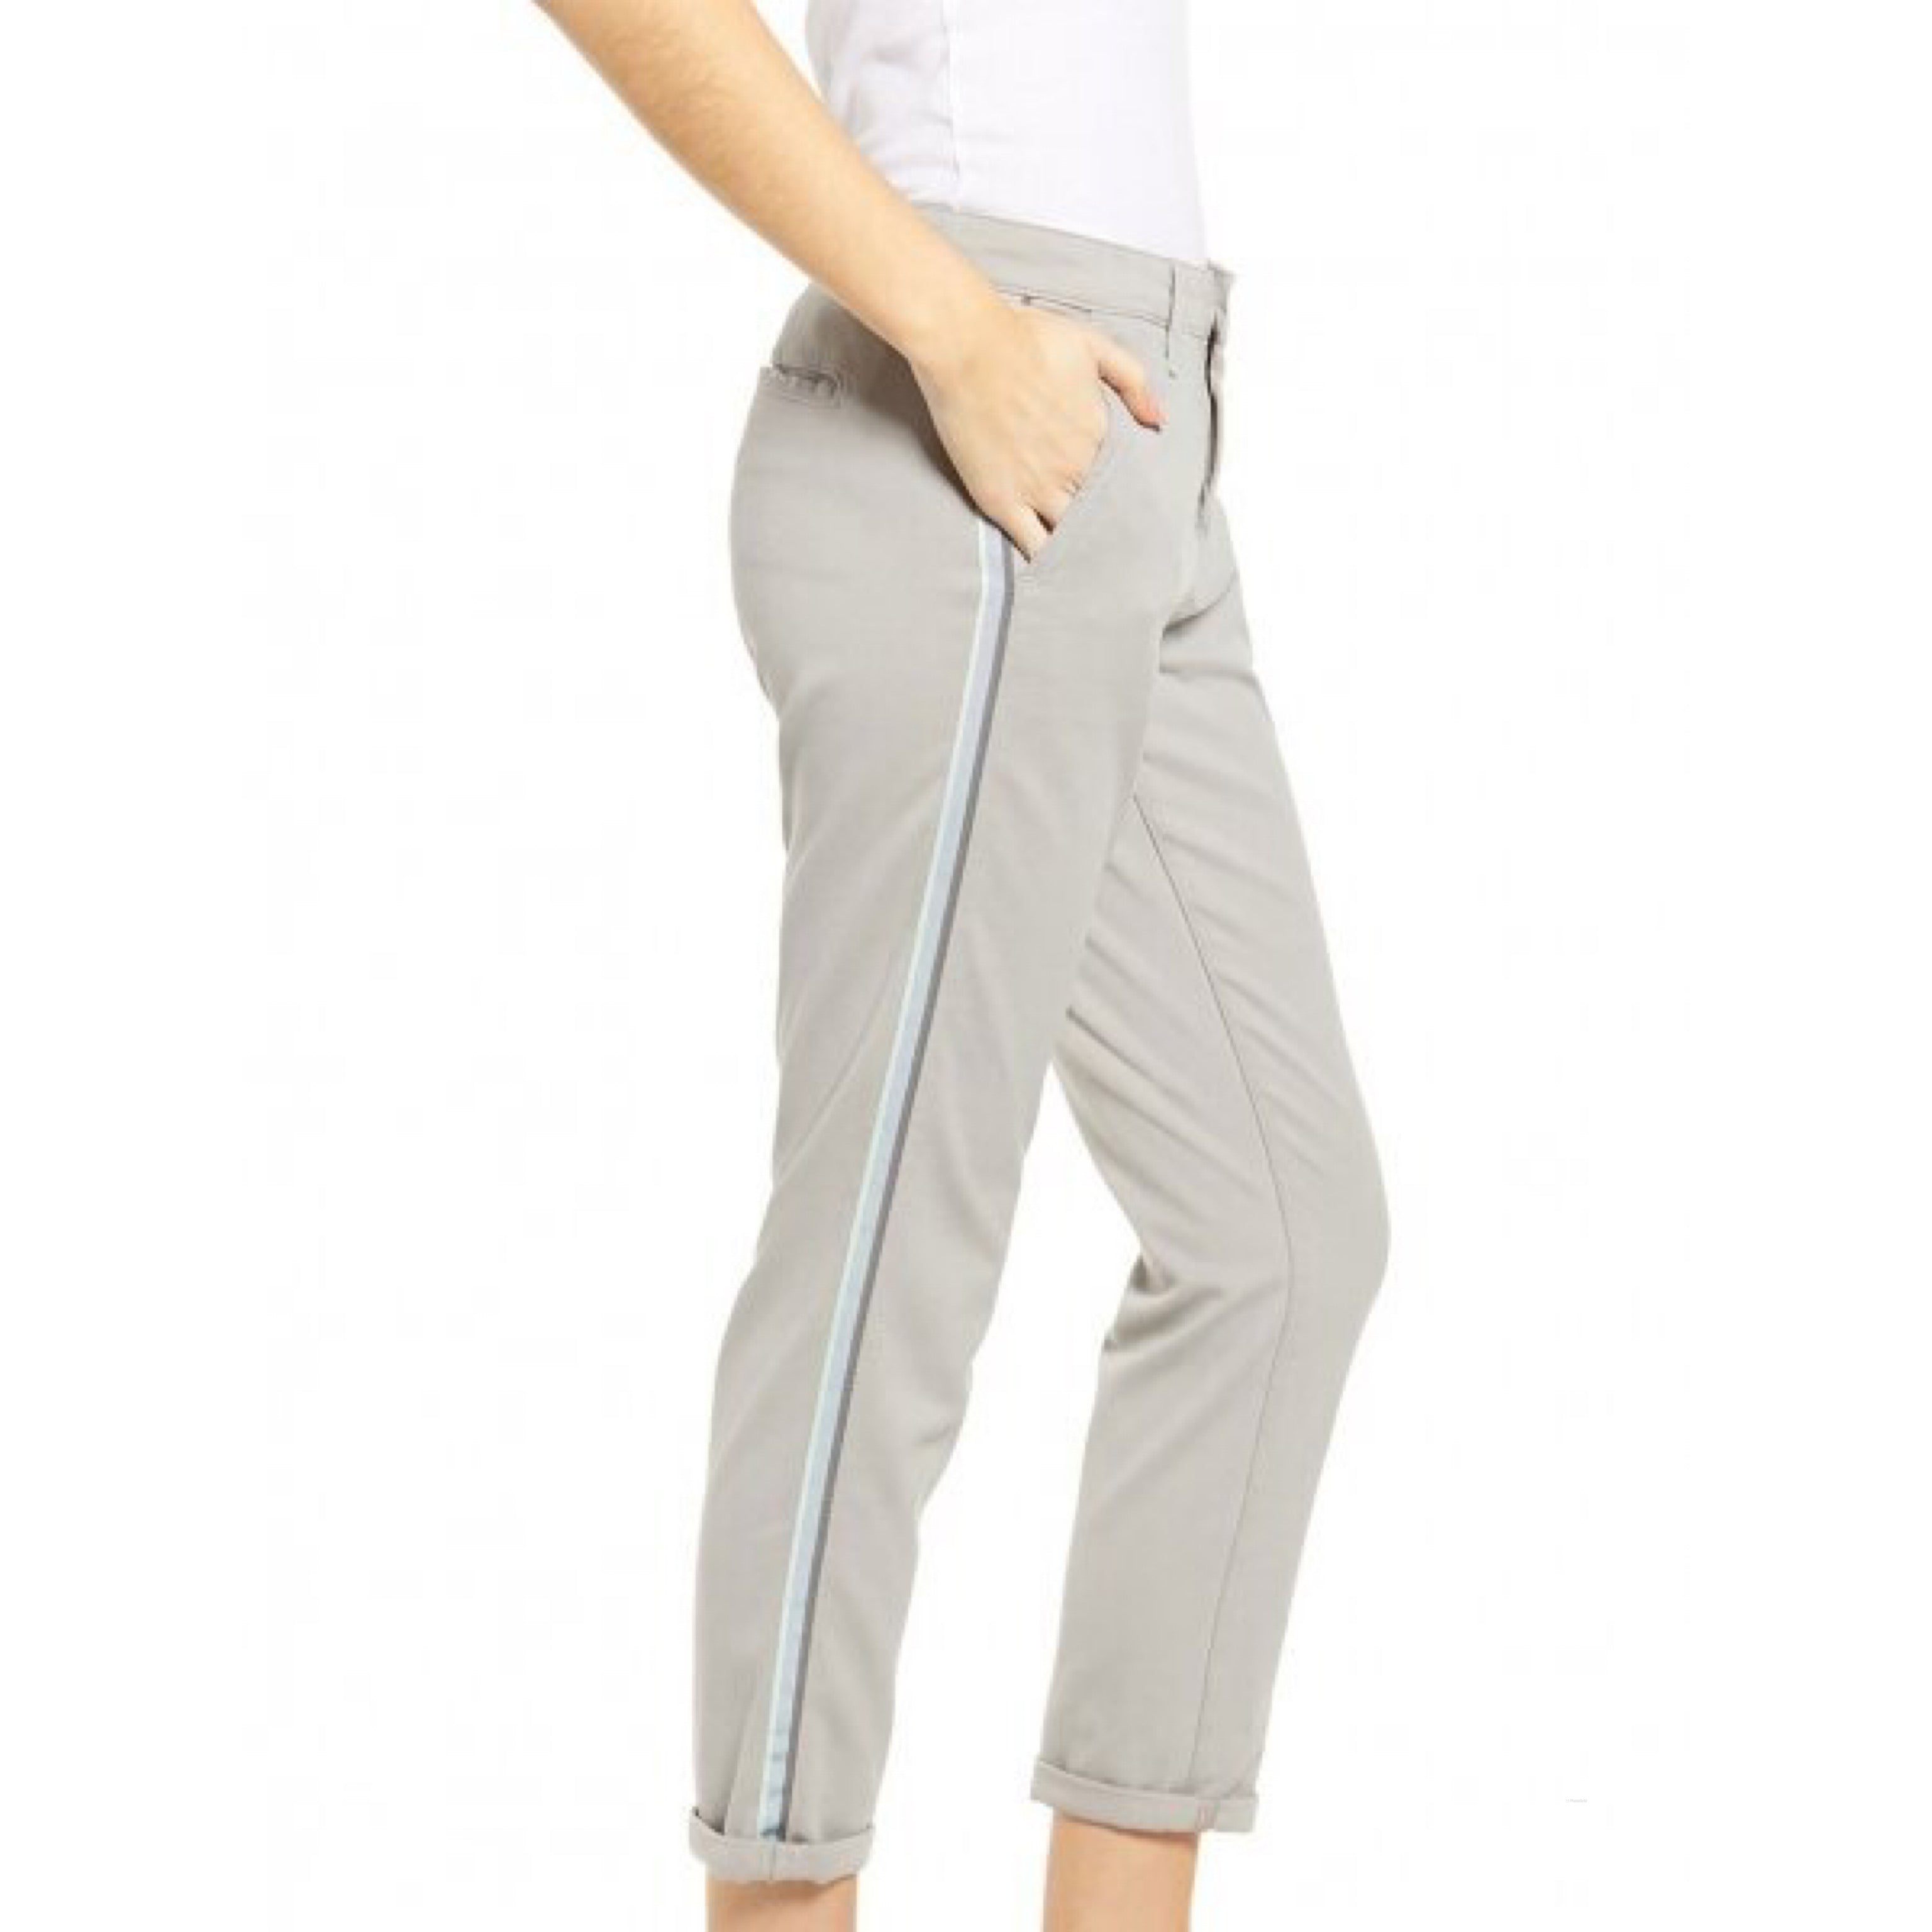 AG Caden side-stripe gray/sage pants, size 27, NEW WITH TAGS!